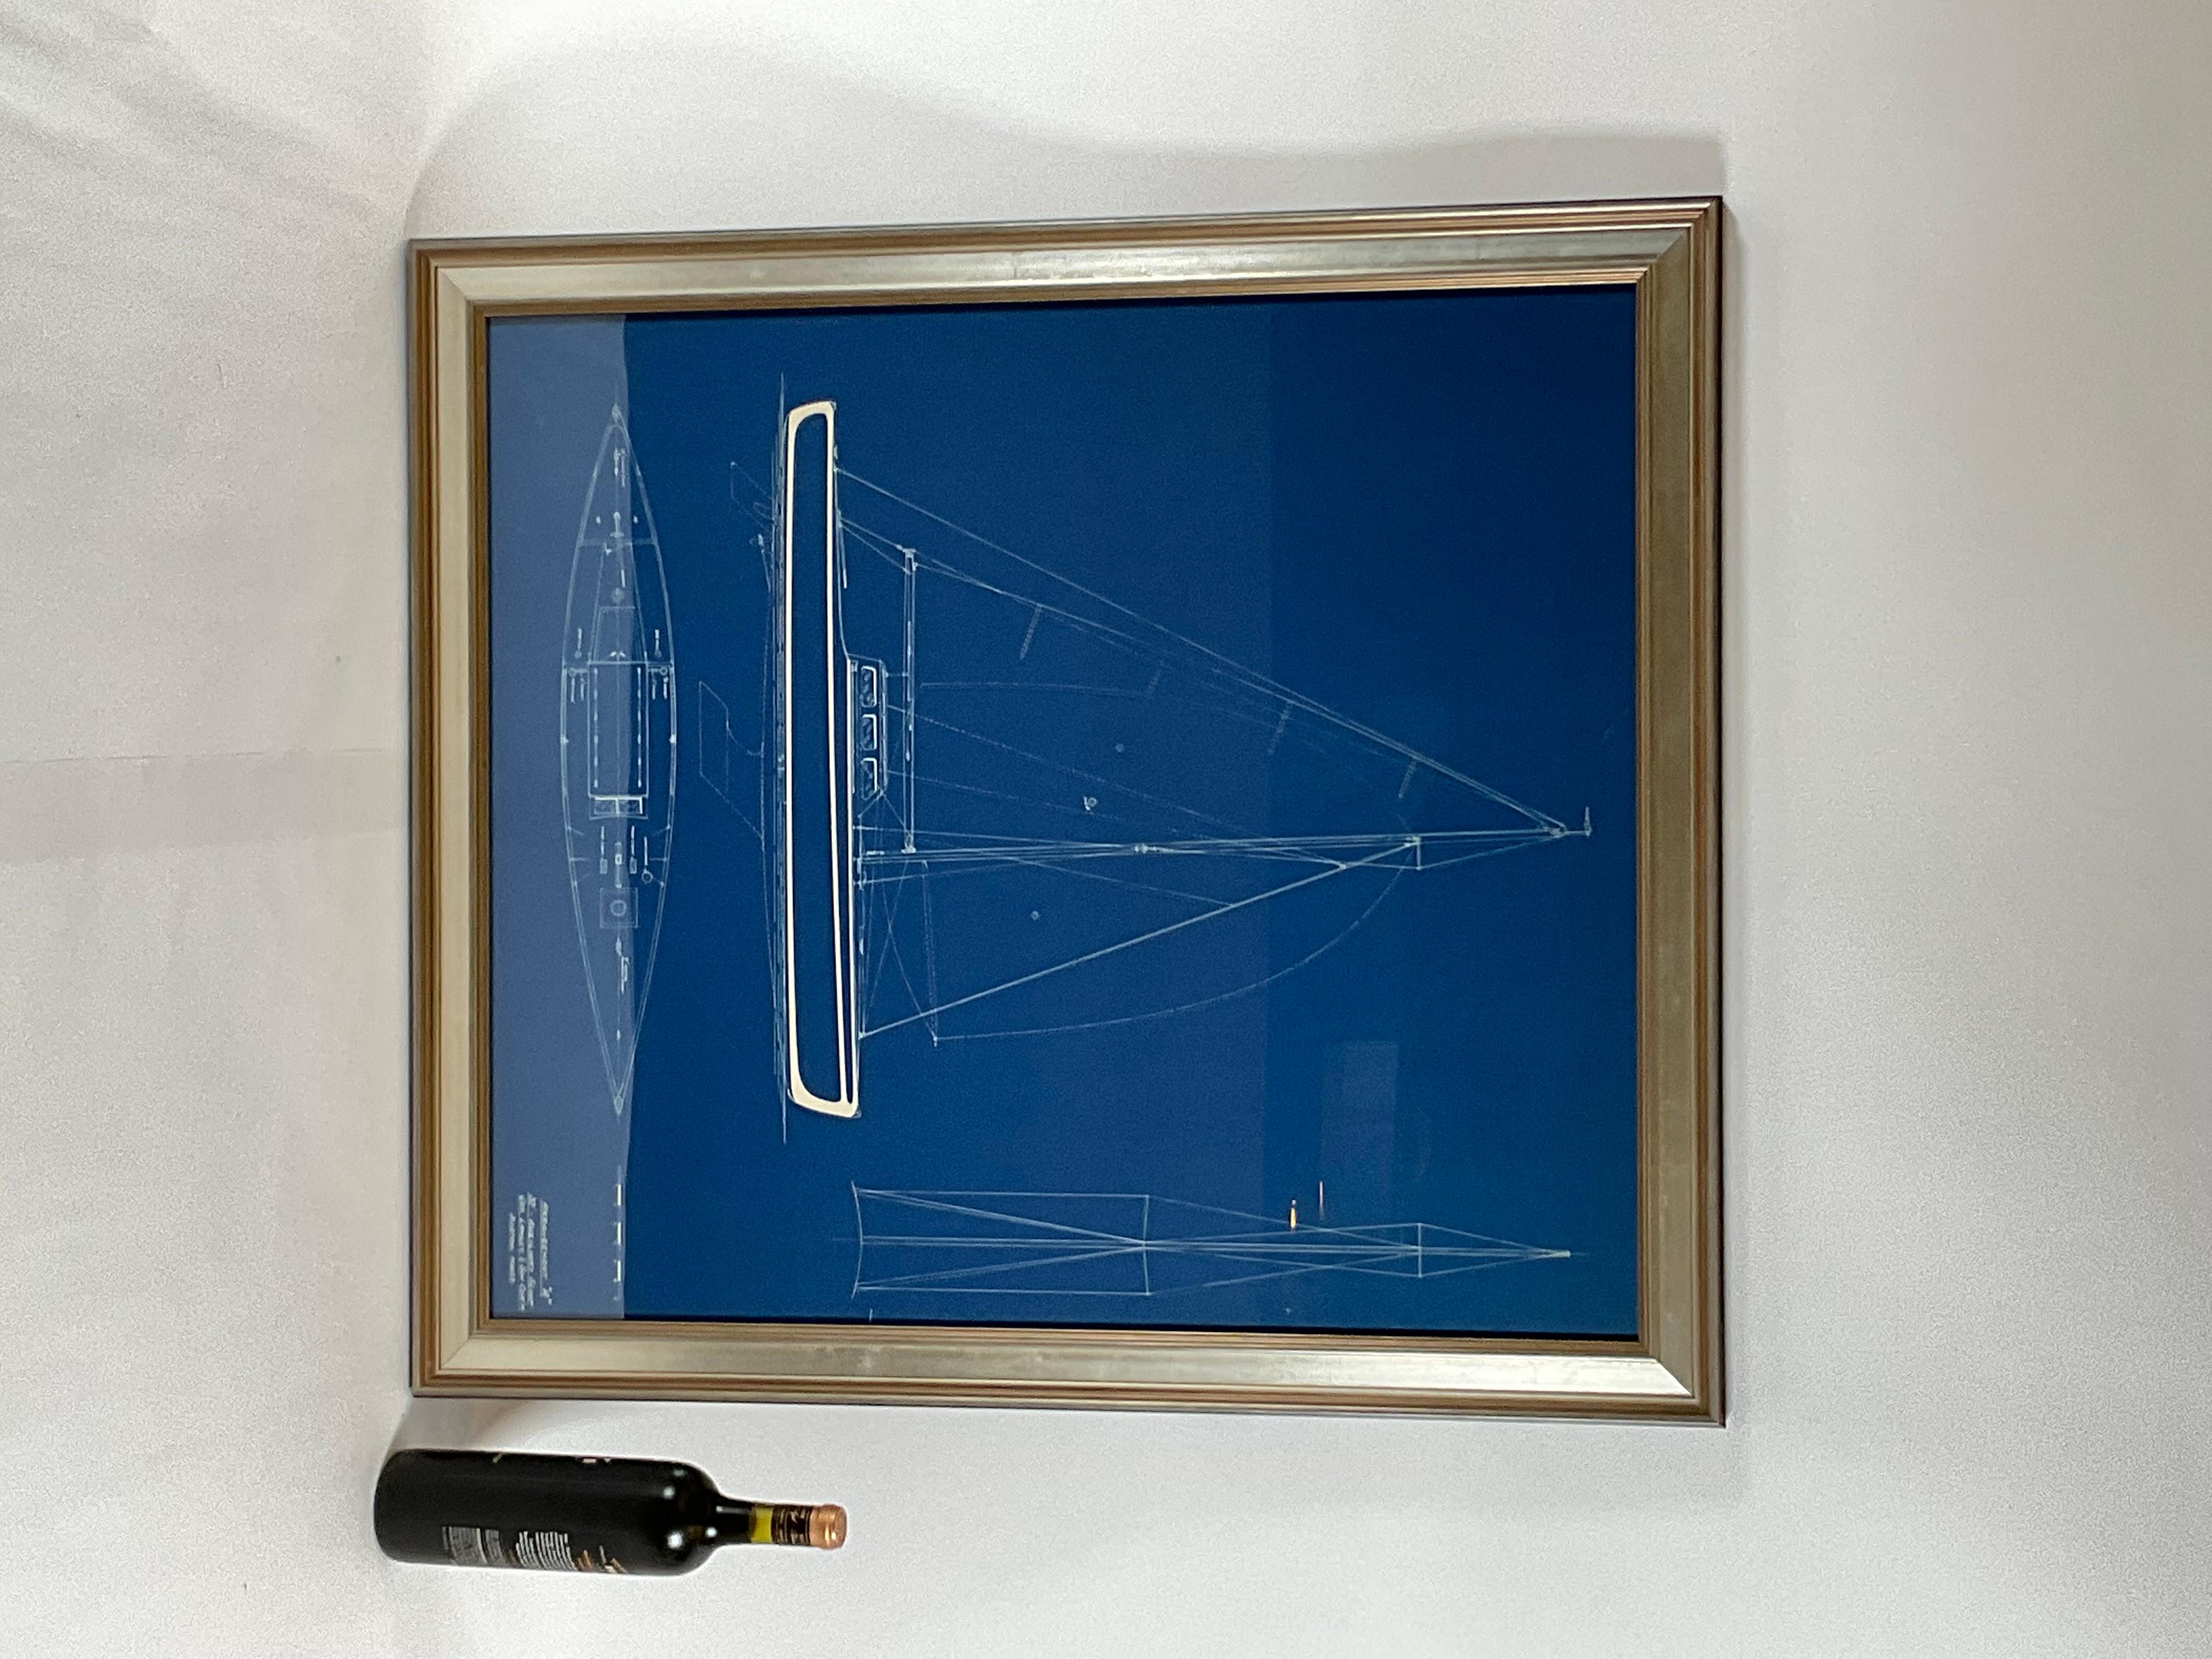 Blueprint for a thirty-seven foot sloop from George Lawley and Son boat builders and naval architects. The plan is marked “Arrangement A” on the legend. The profile shows a handsome yacht with cabin, mast, spinnaker pole, boom, tiller, cleats winch,